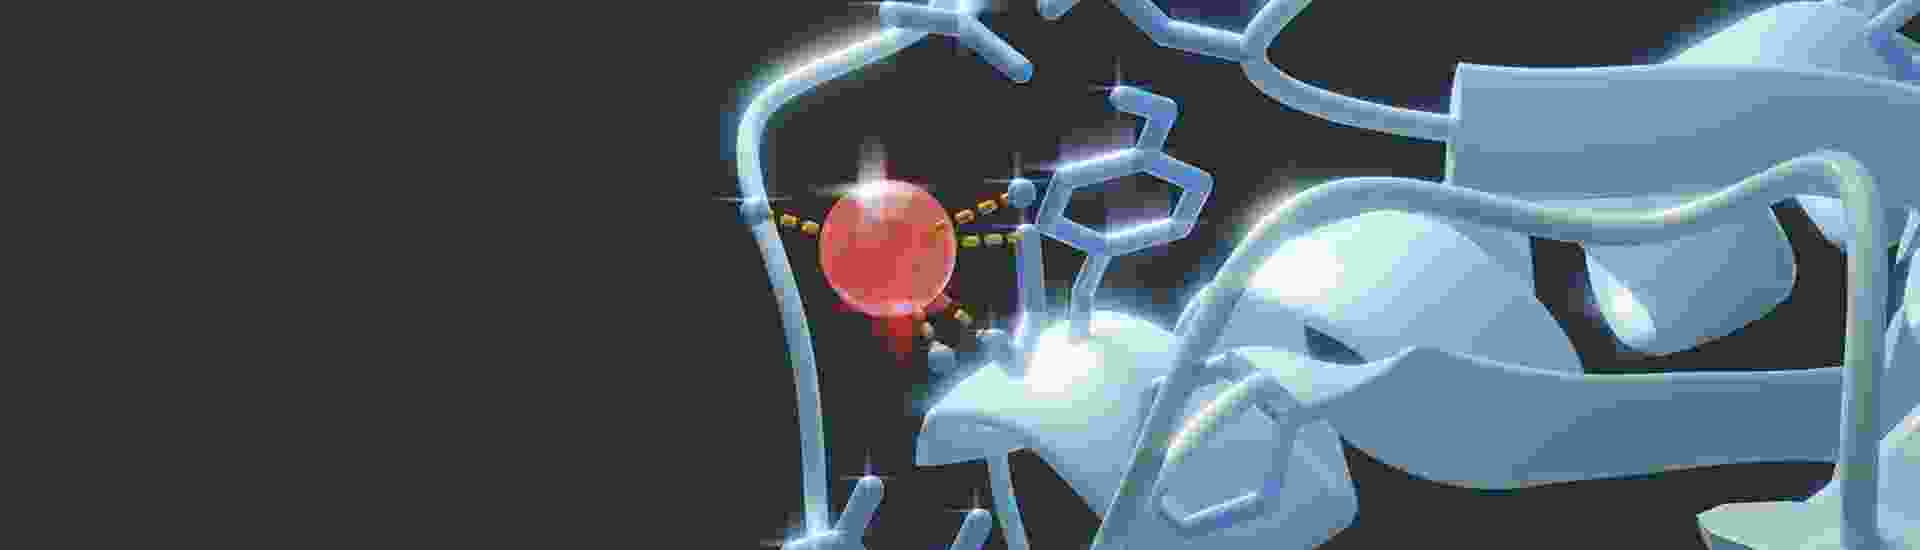 close up image of a red sphere in between blue protein ribbons in a black background 